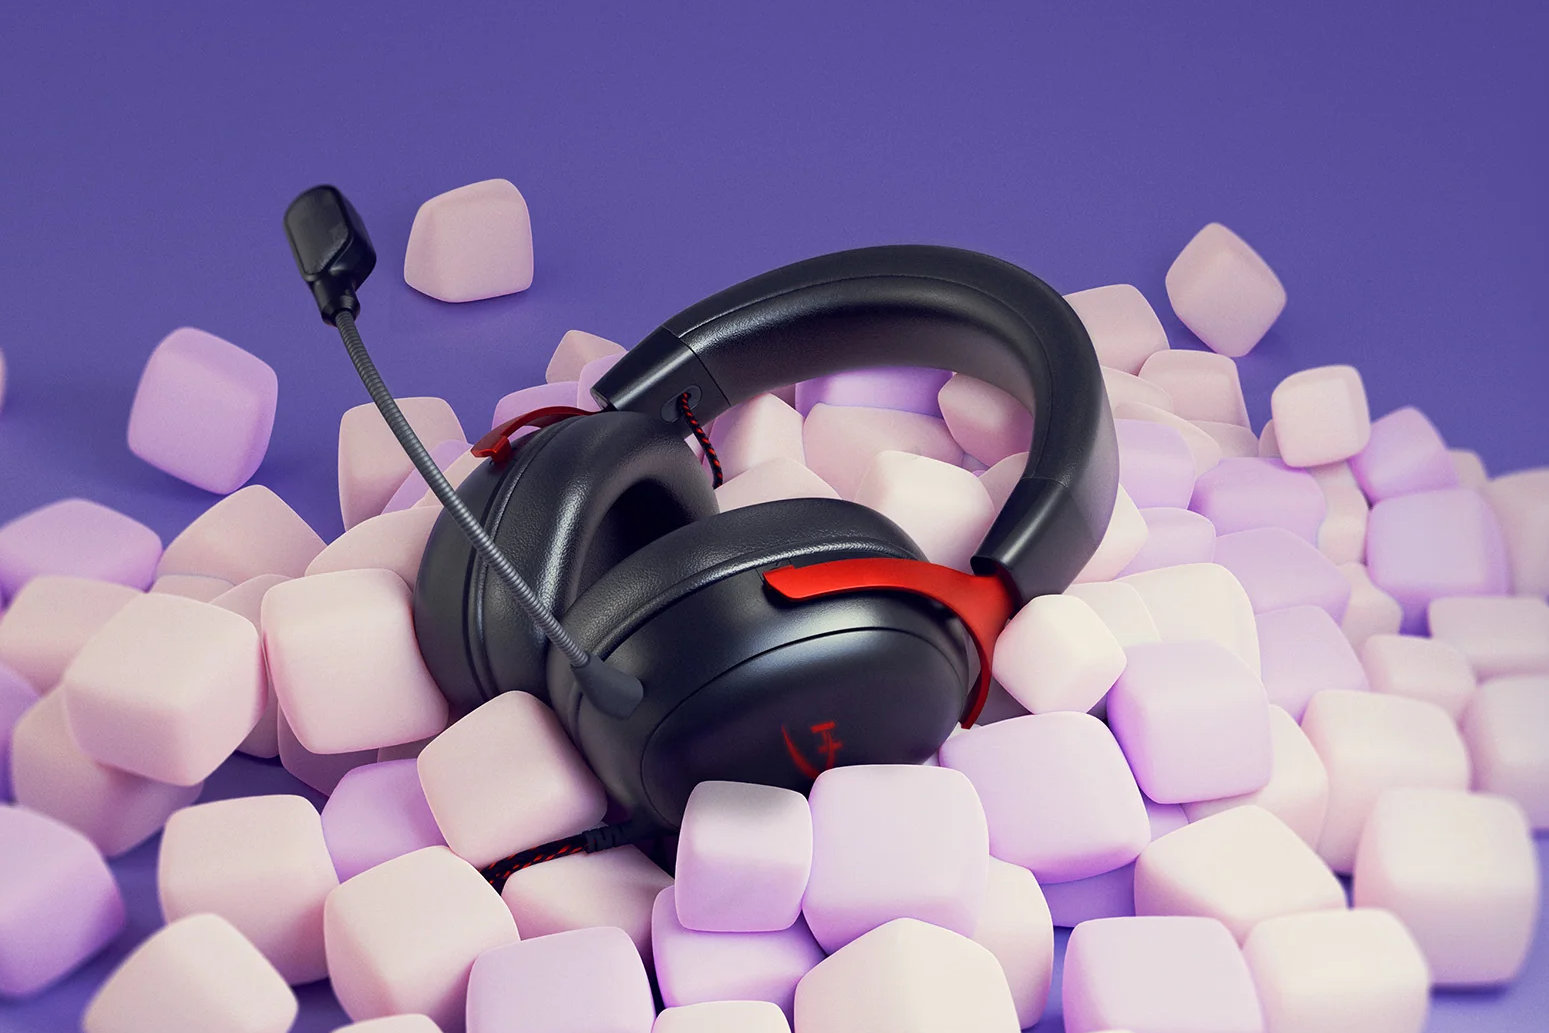 The HyperX Cloud III wired gaming headset sits on top of some purple and pink squares on a purple background.